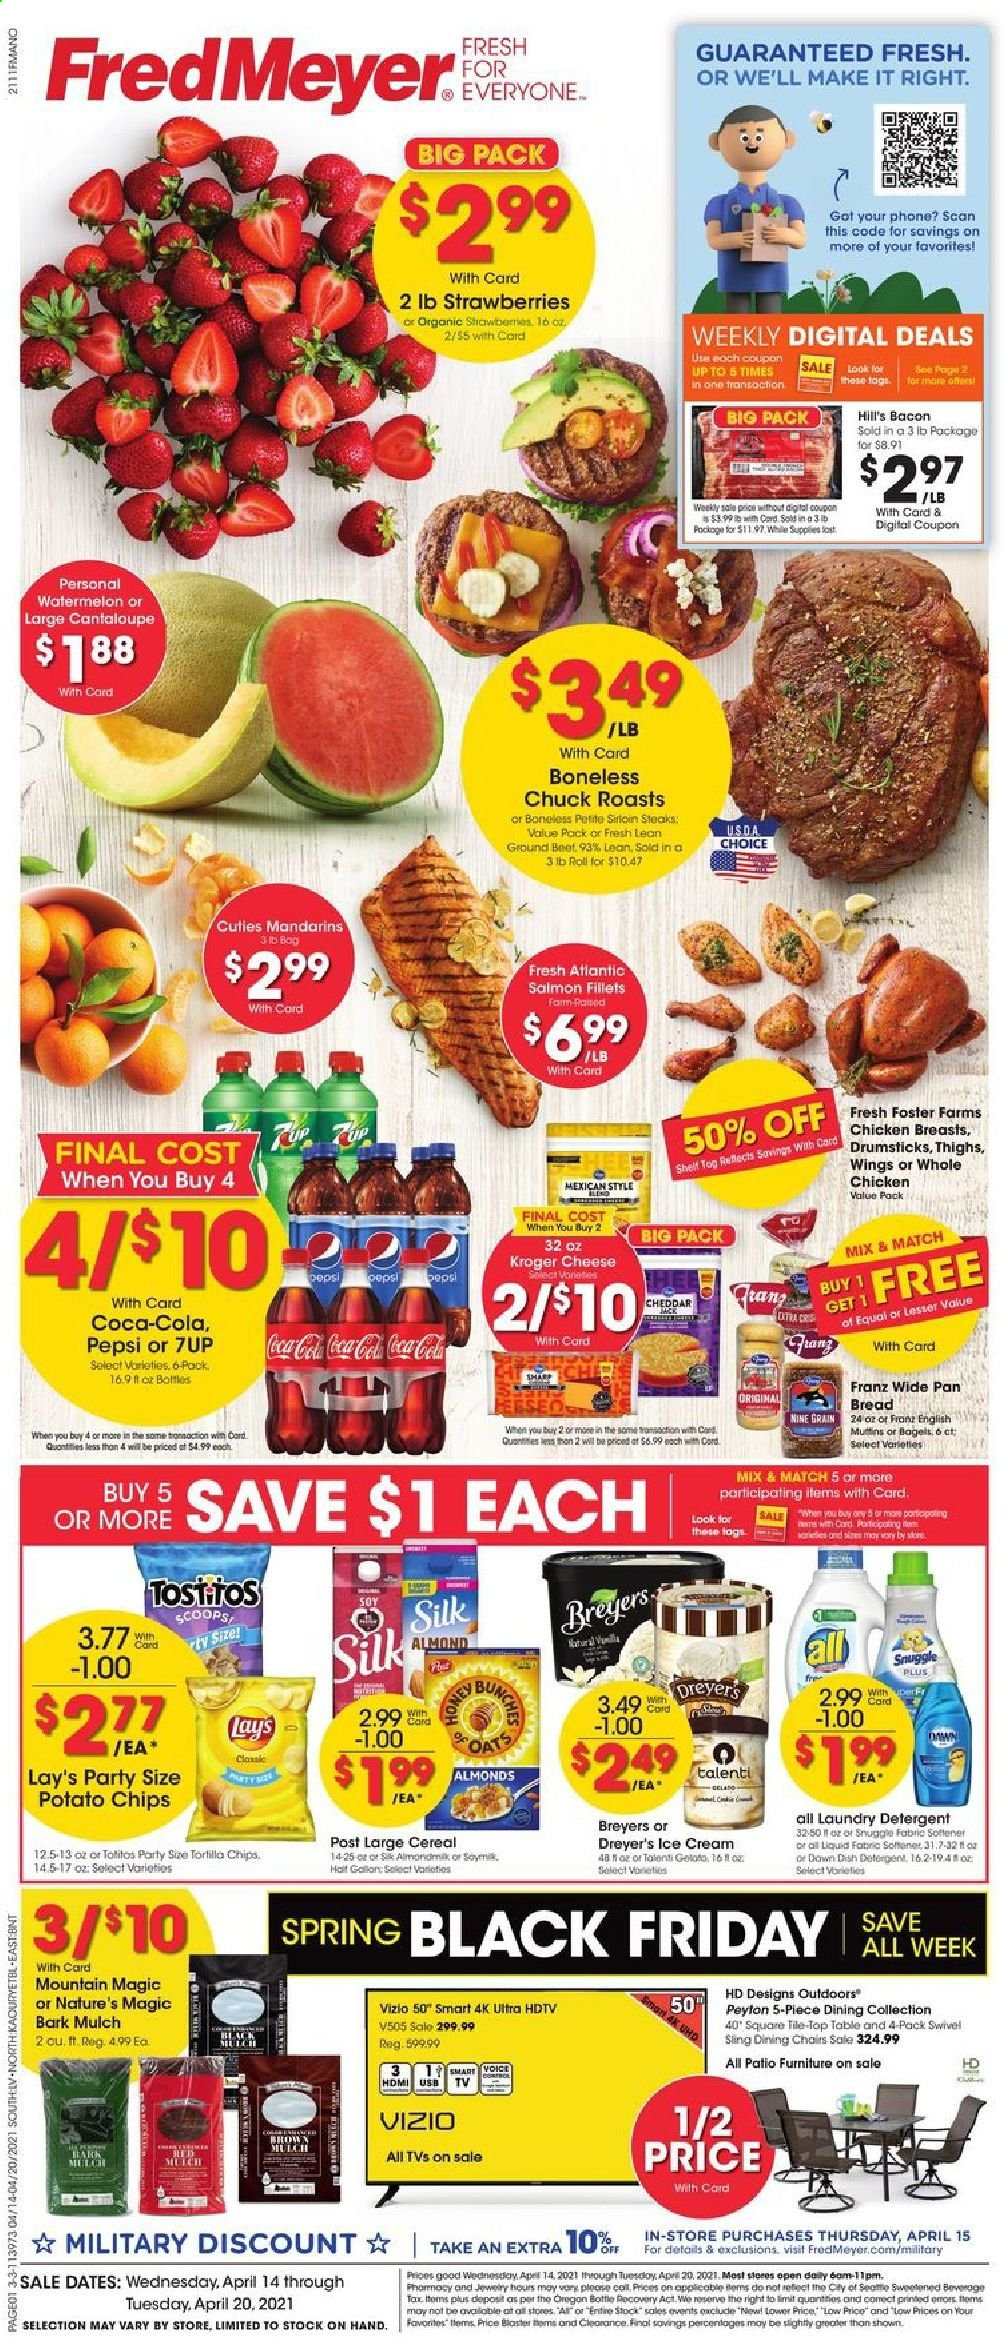 thumbnail - Fred Meyer Flyer - 04/14/2021 - 04/20/2021 - Sales products - Vizio, bagels, bread, cantaloupe, mandarines, strawberries, watermelon, salmon, salmon fillet, bacon, cheese, Silk, ice cream, Talenti Gelato, tortilla chips, potato chips, chips, Lay’s, Tostitos, cereals, Coca-Cola, Pepsi, 7UP, whole chicken, chicken breasts, steak, detergent, laundry detergent, pan, Hill's, HDTV, TV, garden mulch. Page 1.